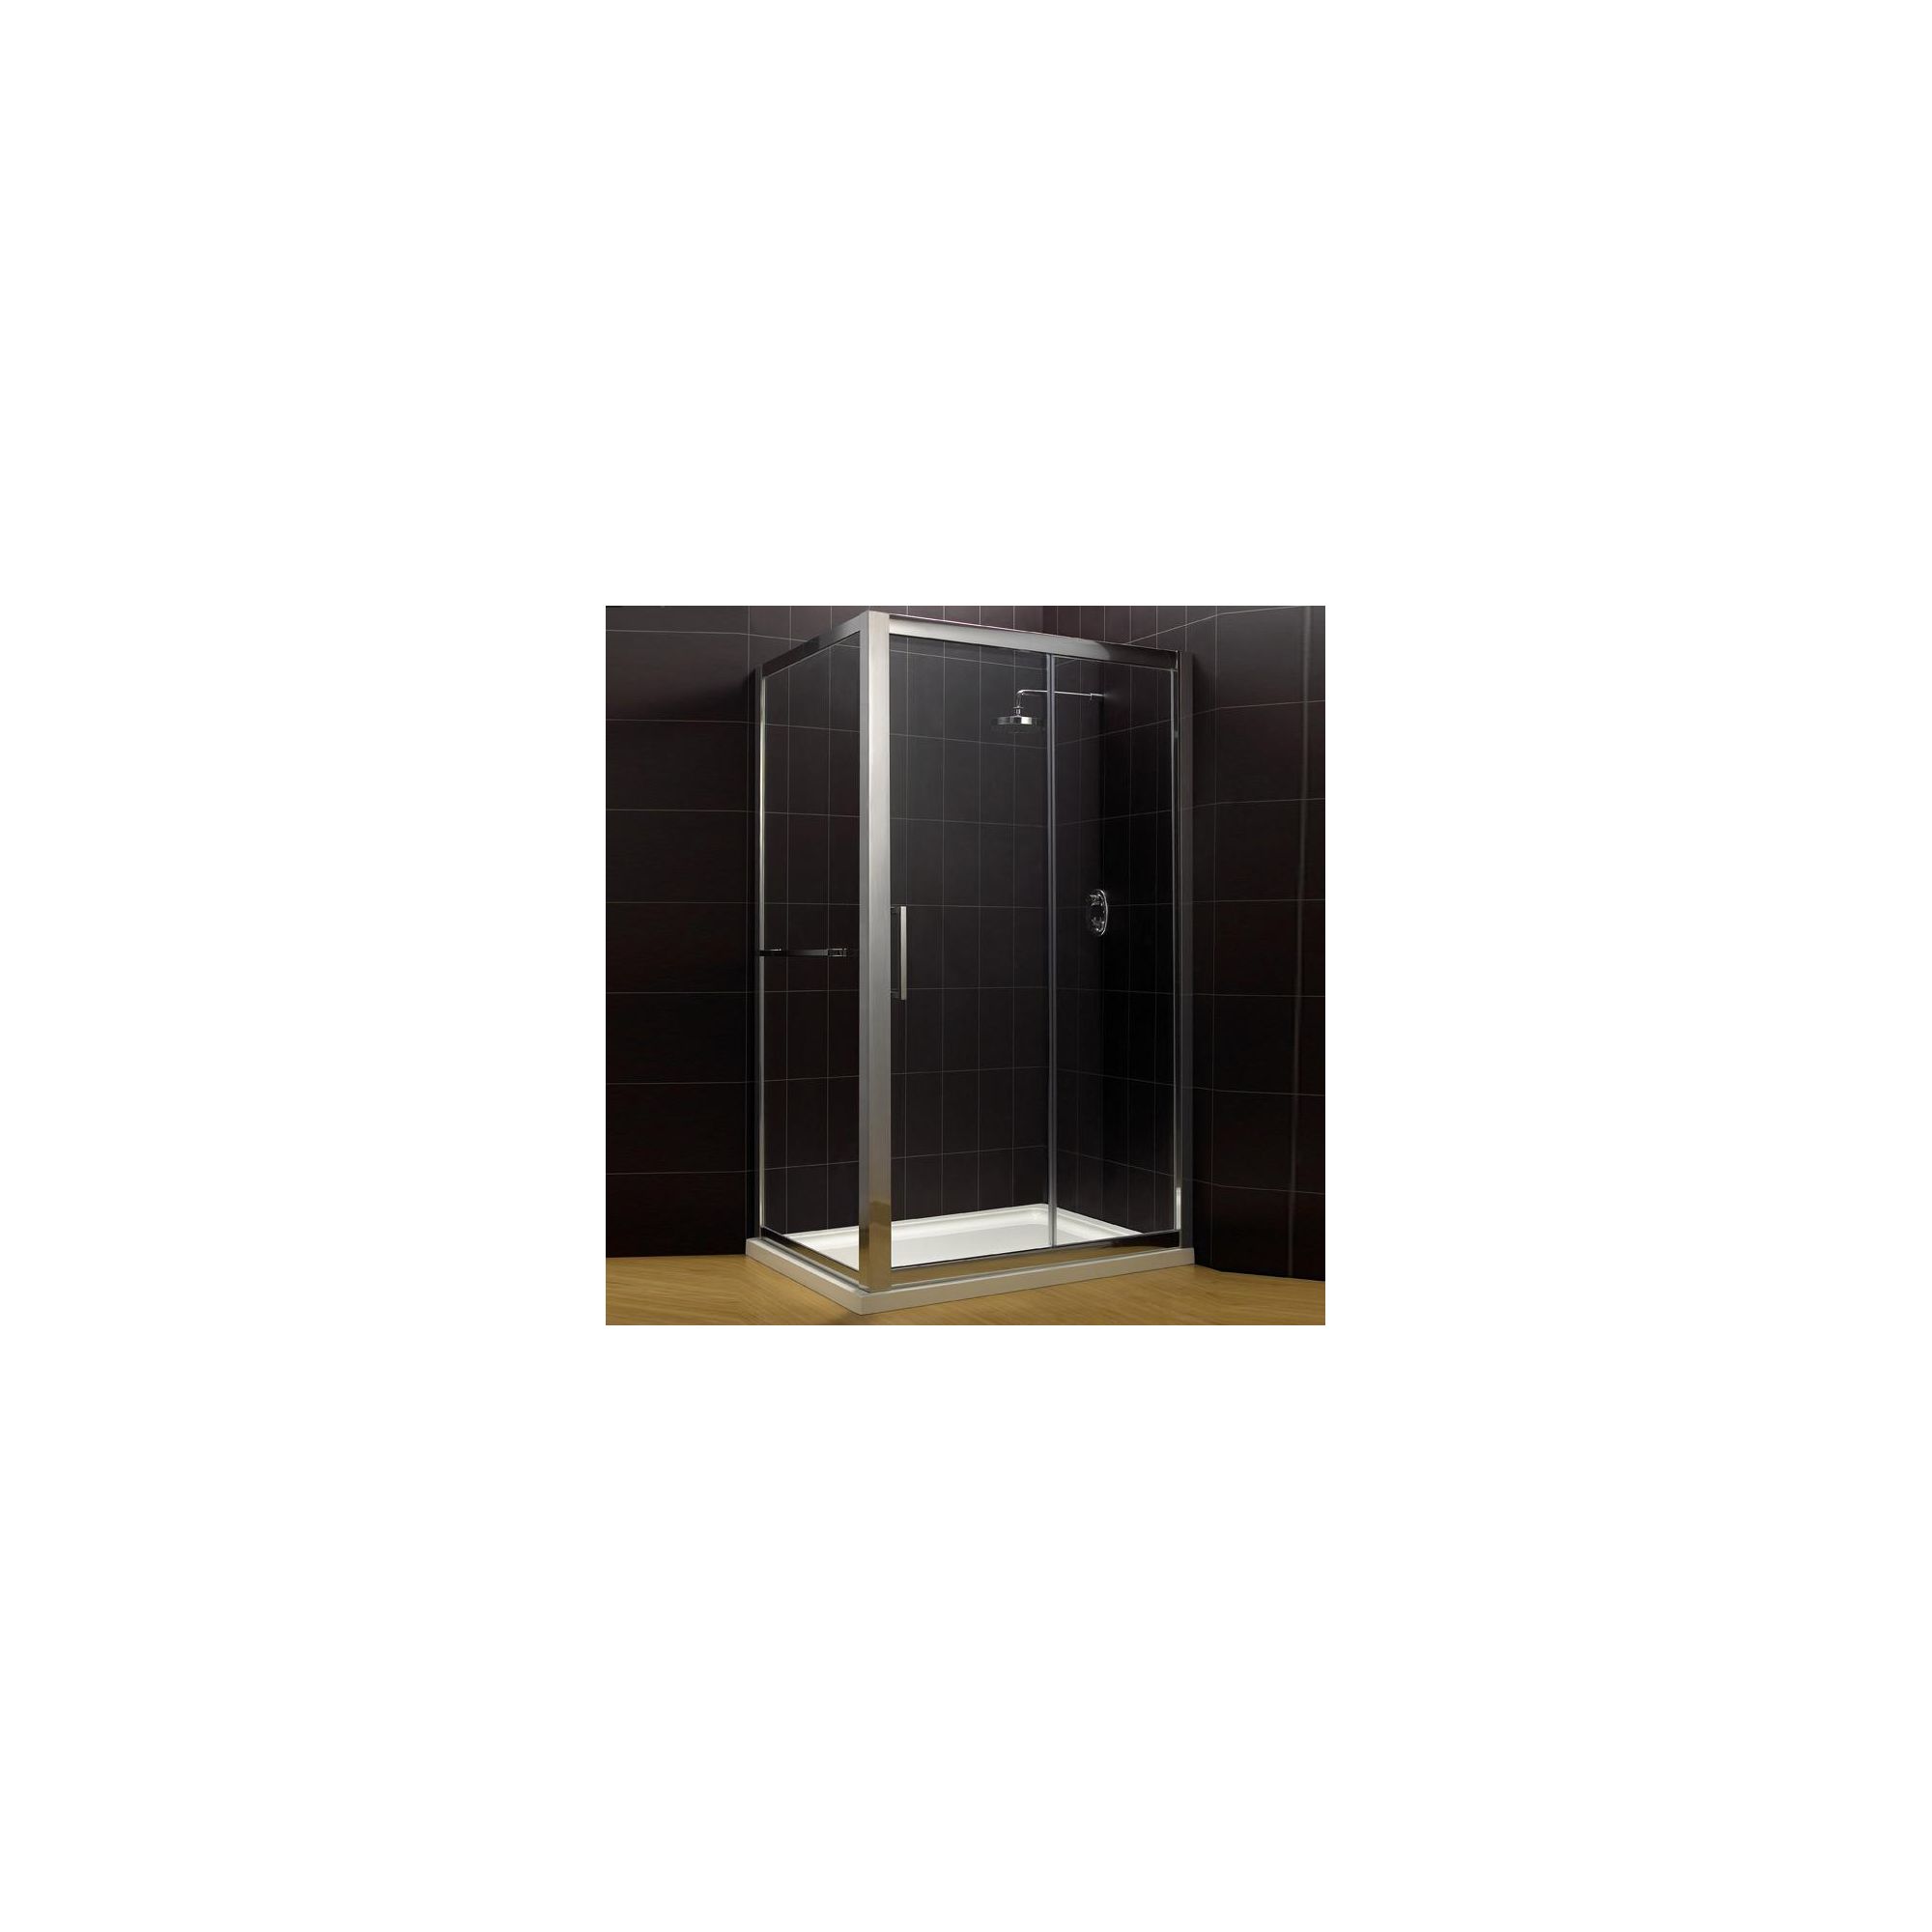 Duchy Supreme Silver Sliding Door Shower Enclosure, 1600mm x 900mm, Standard Tray, 8mm Glass at Tescos Direct